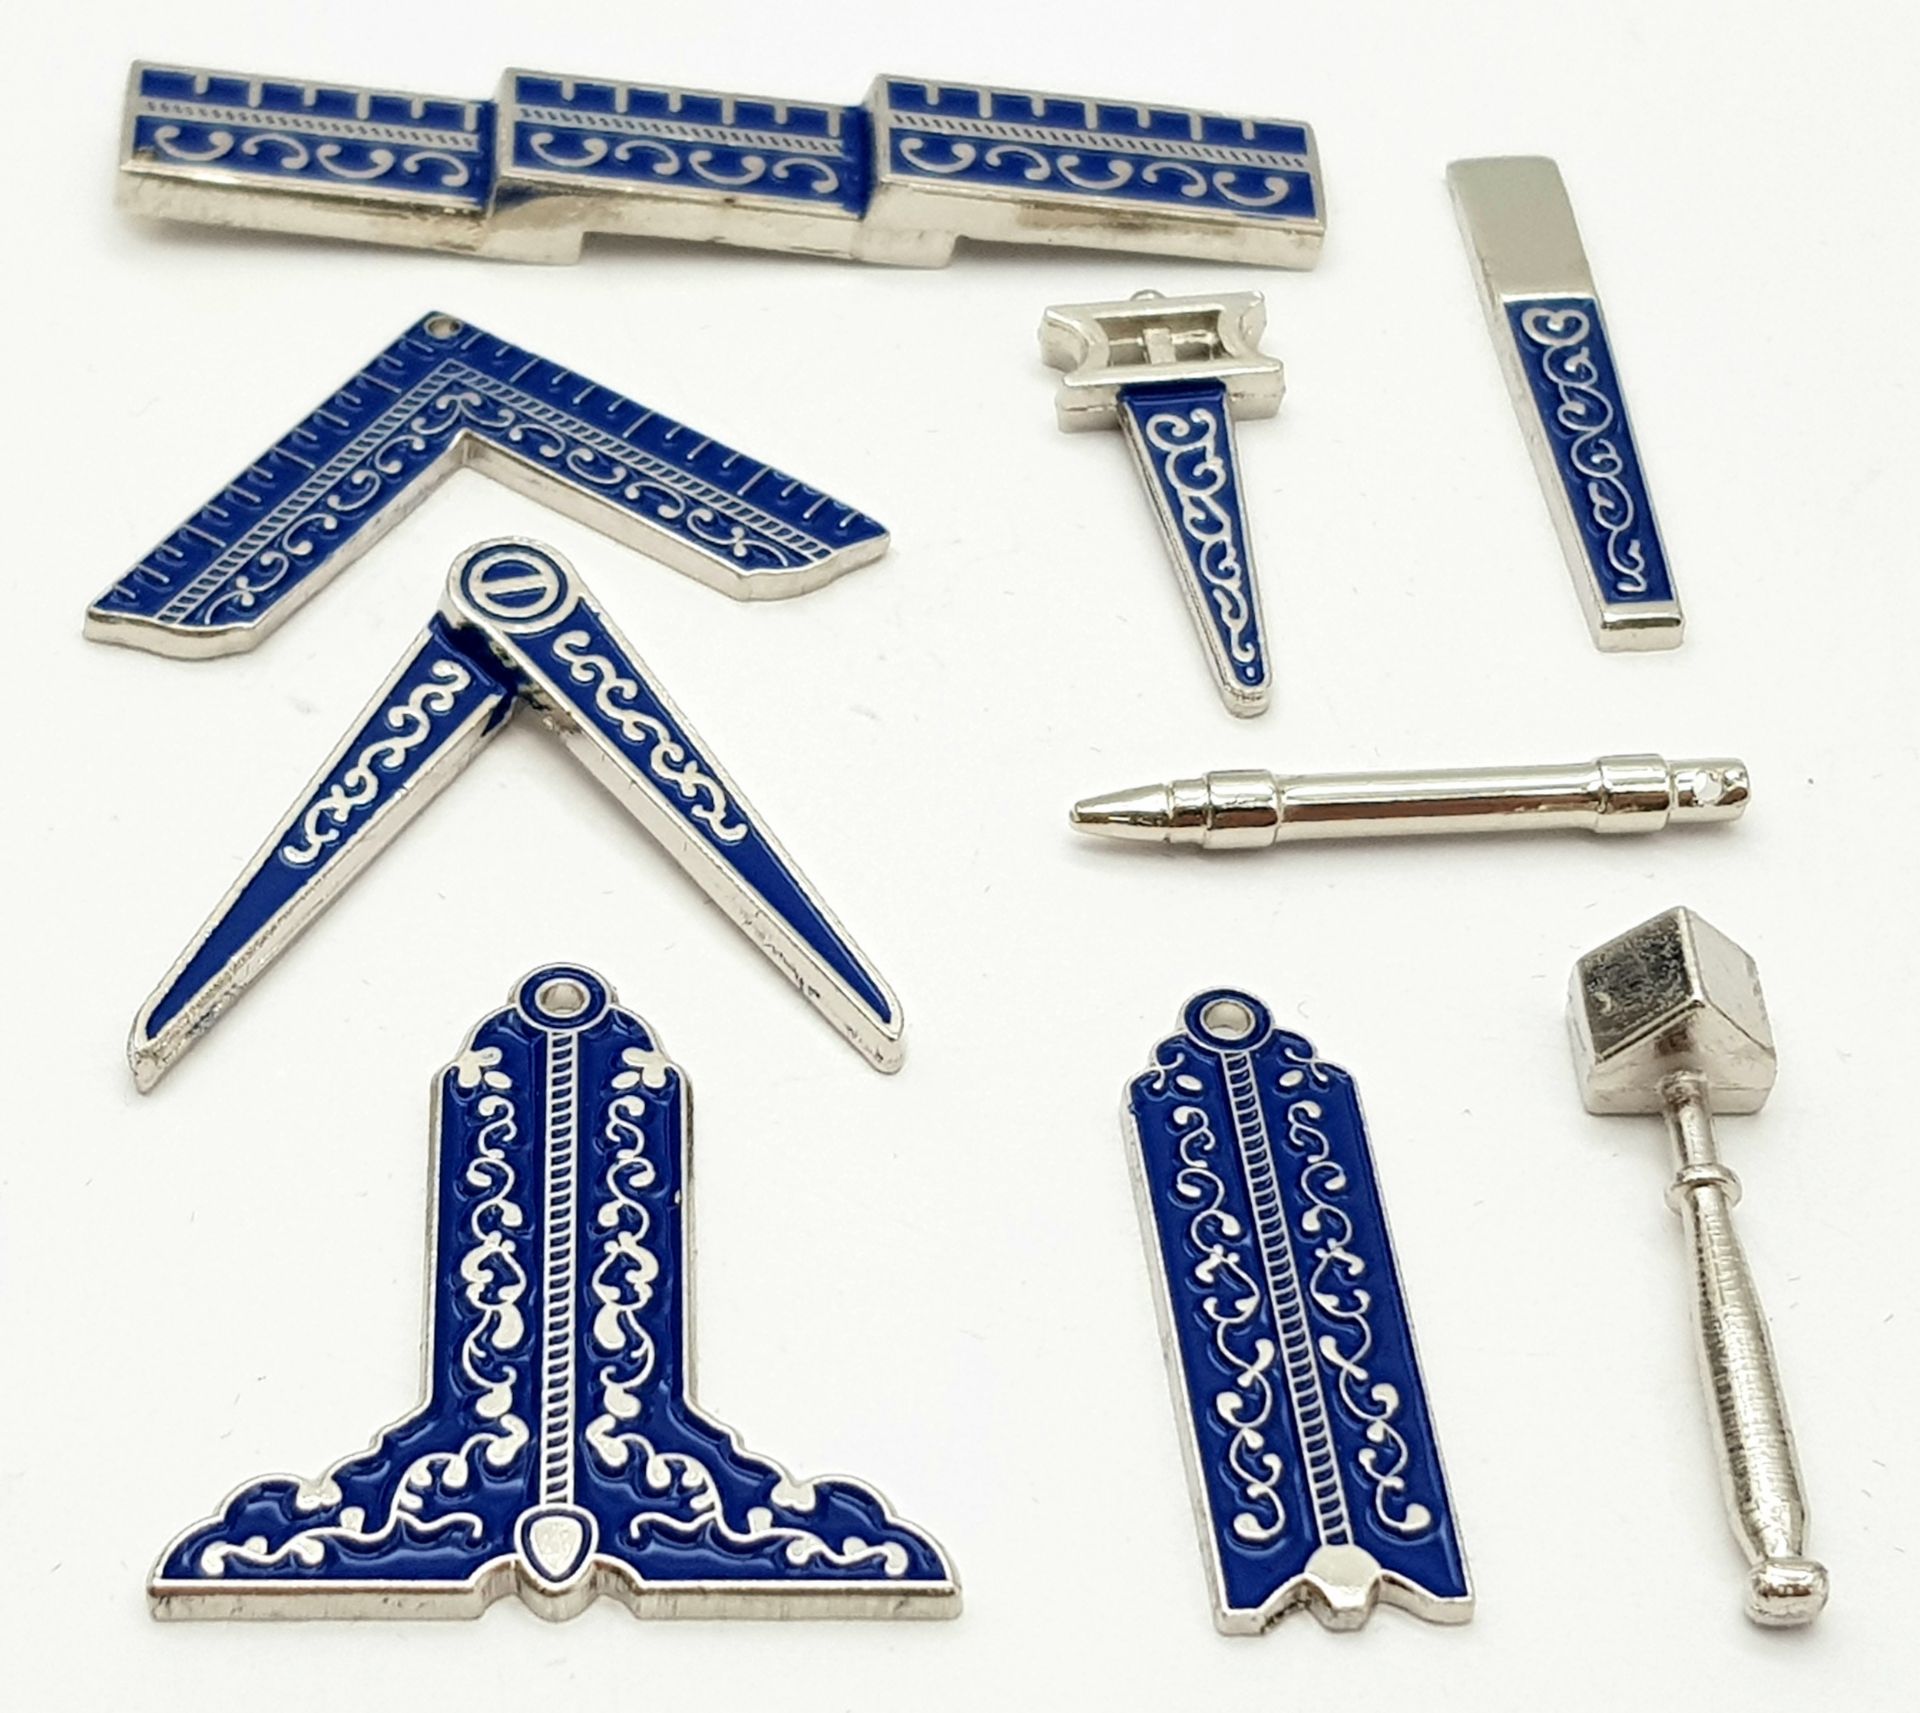 A miniature set of Masonic Working Tools for all Three Degrees. Perfect for training and rehearsals, - Image 4 of 6